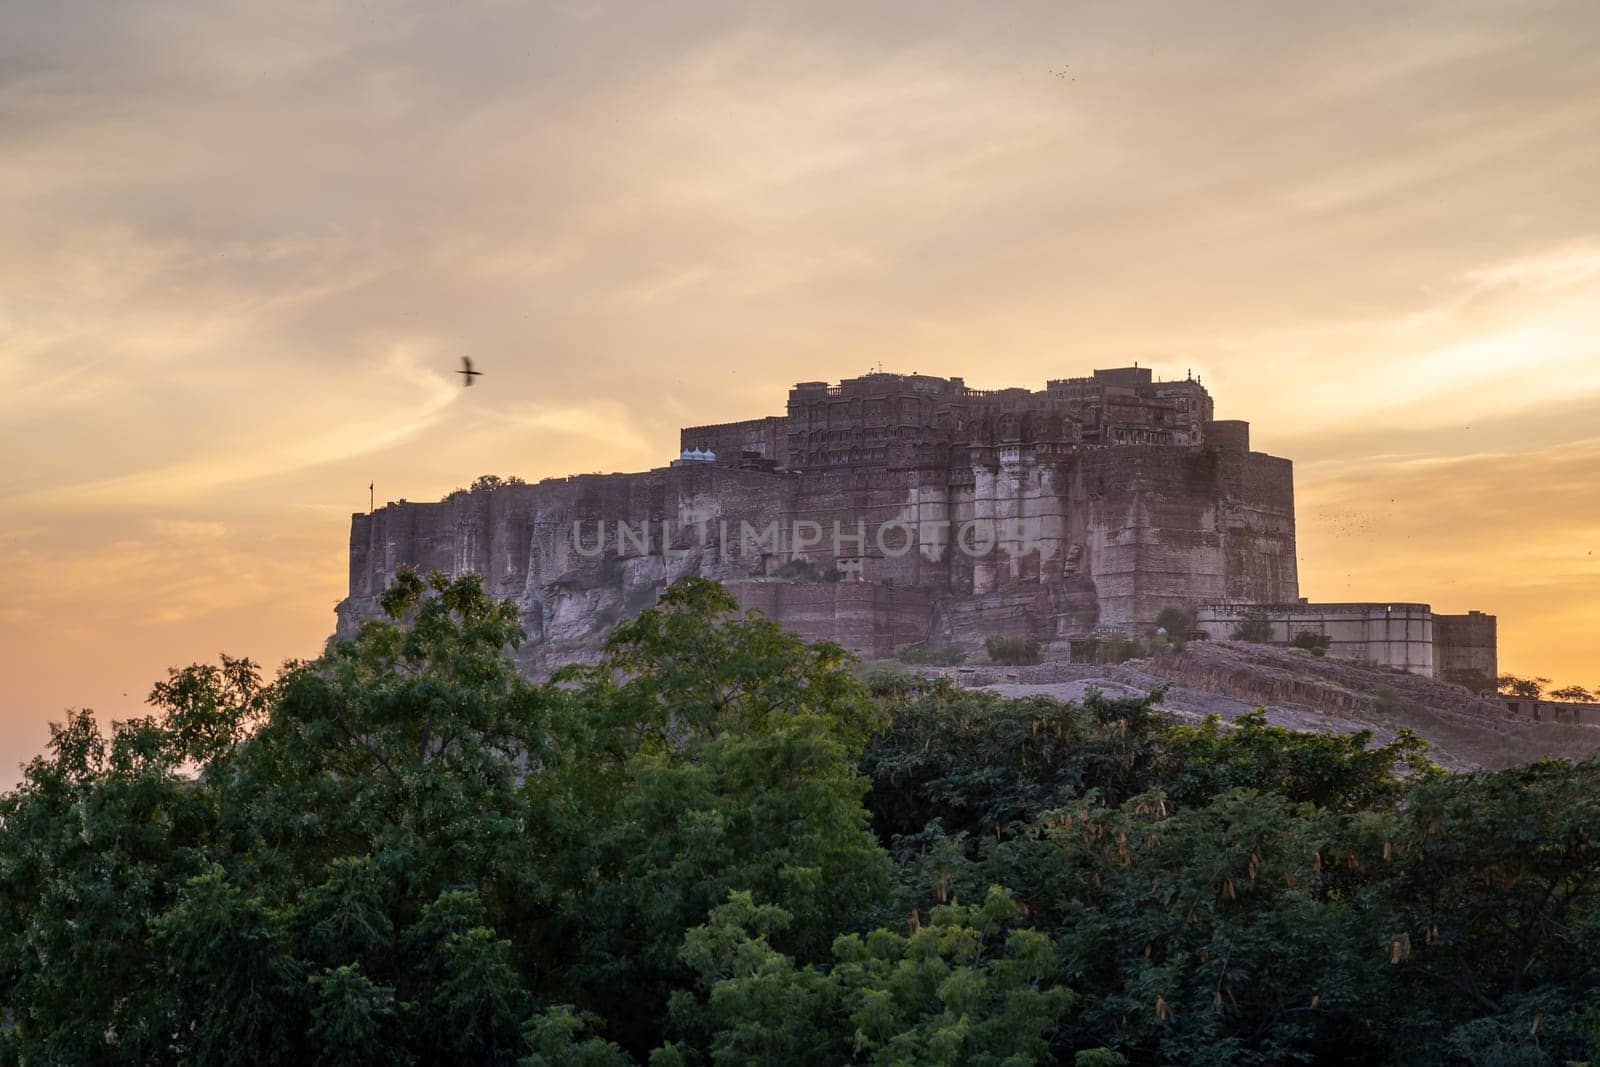 mehrangarh fort in Jodhpur Rajasthan sitting on hilltop surrounded by orange monsoon clouds showing the landmark by Shalinimathur